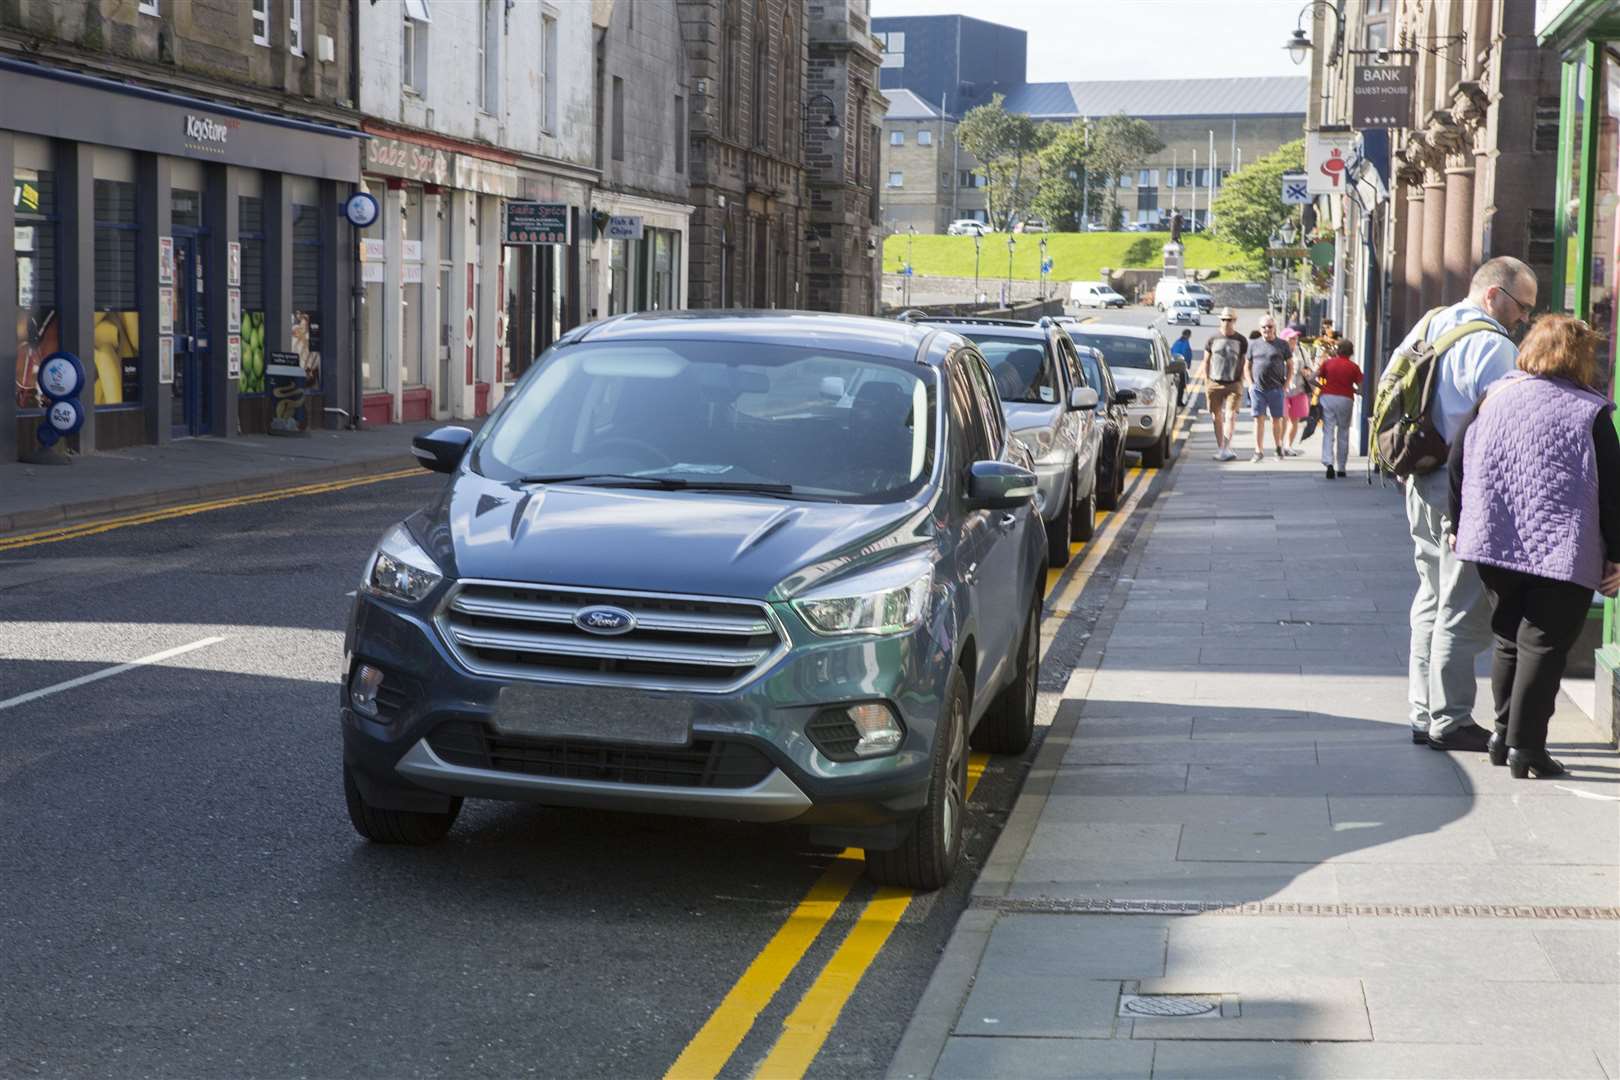 The new double yellow lines appeared to have no immediate effect on parking in Bridge Street. Picture: Robert MacDonald / Northern Studios